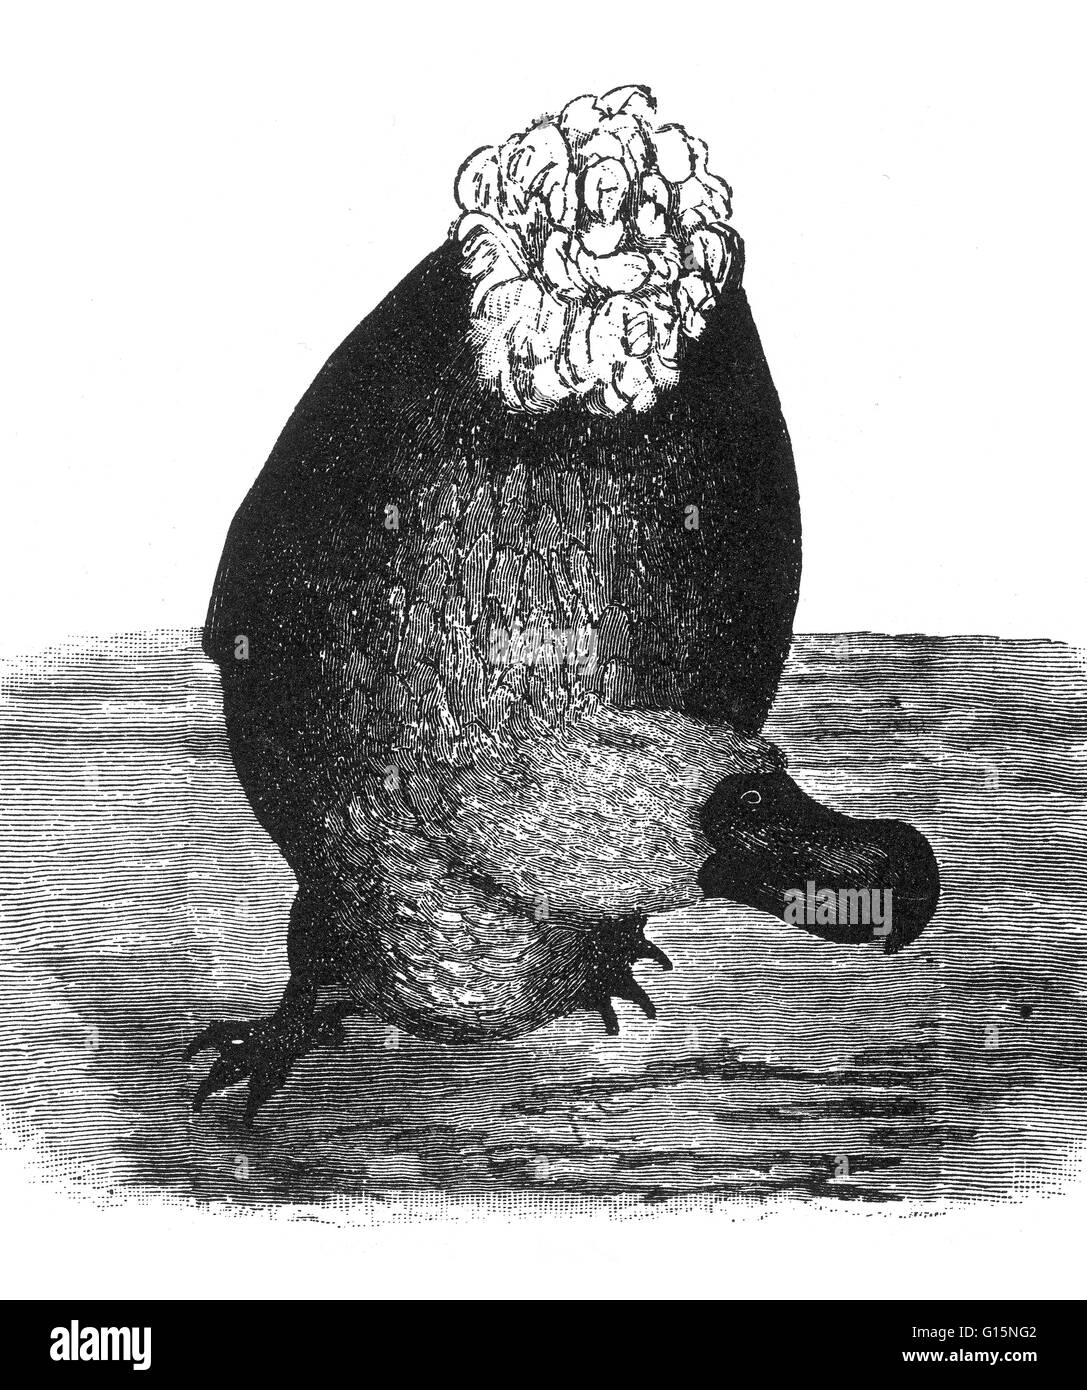 The Dodo is an extinct flightless bird. Its external appearance is evidenced only by paintings and written accounts from the 17th century. Because these vary considerably, and because only a few sketches are known to have been drawn from live specimens, i Stock Photo